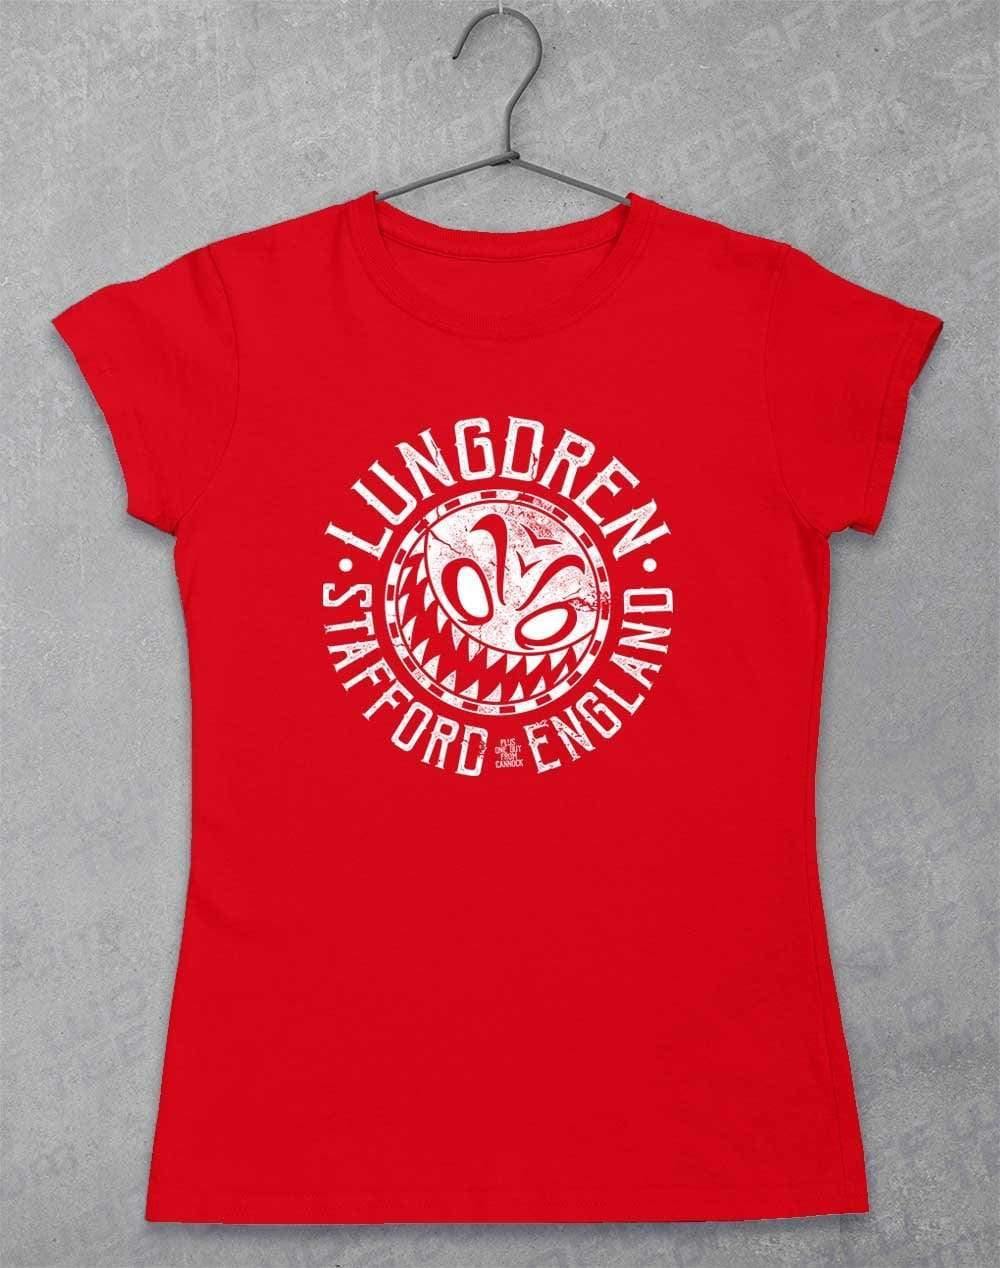 LUNGDREN Stafford Smiley - Womens T-Shirt 8-10 / Red  - Off World Tees